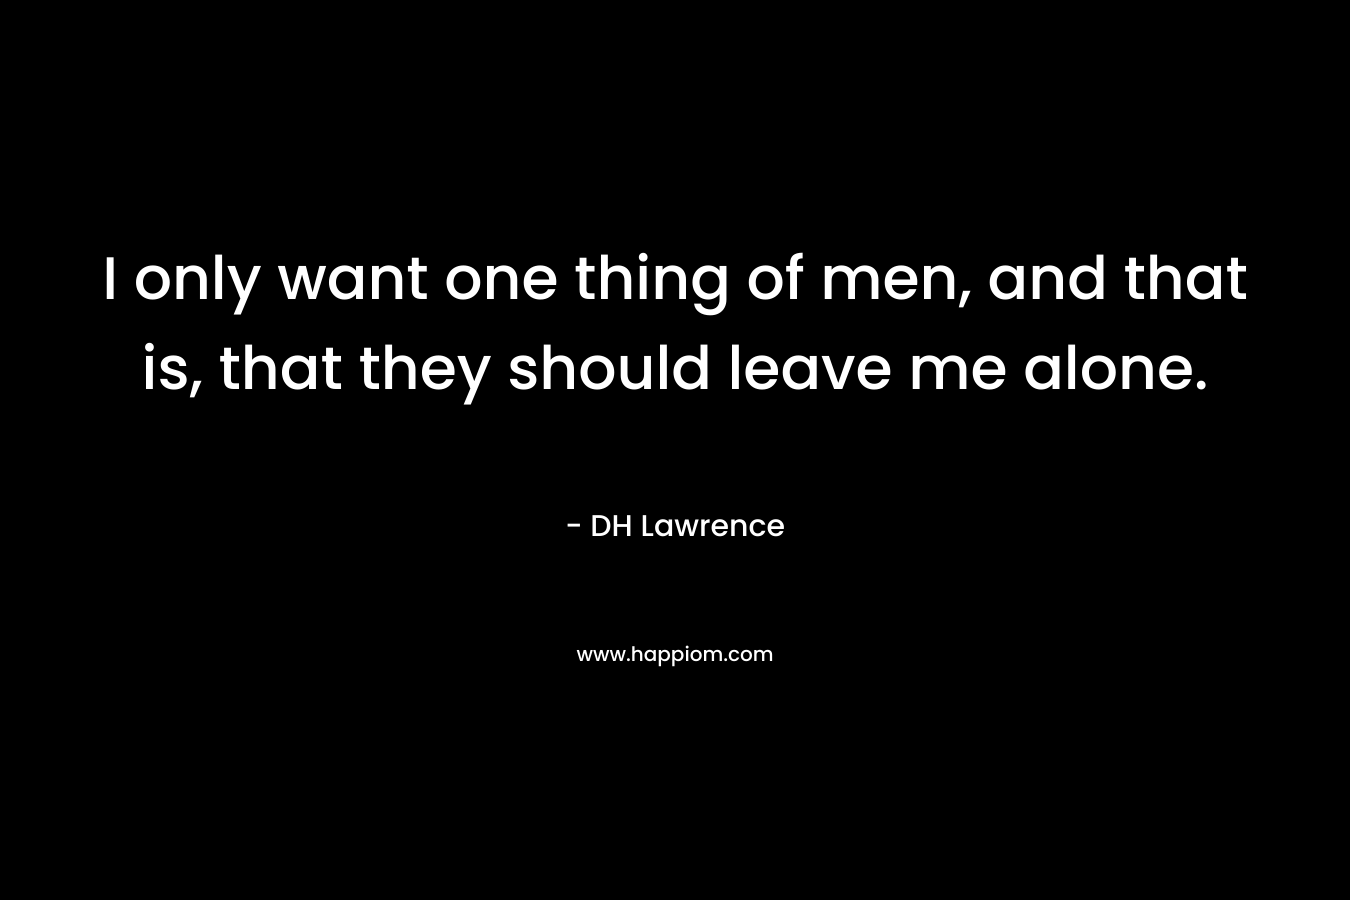 I only want one thing of men, and that is, that they should leave me alone. – DH Lawrence